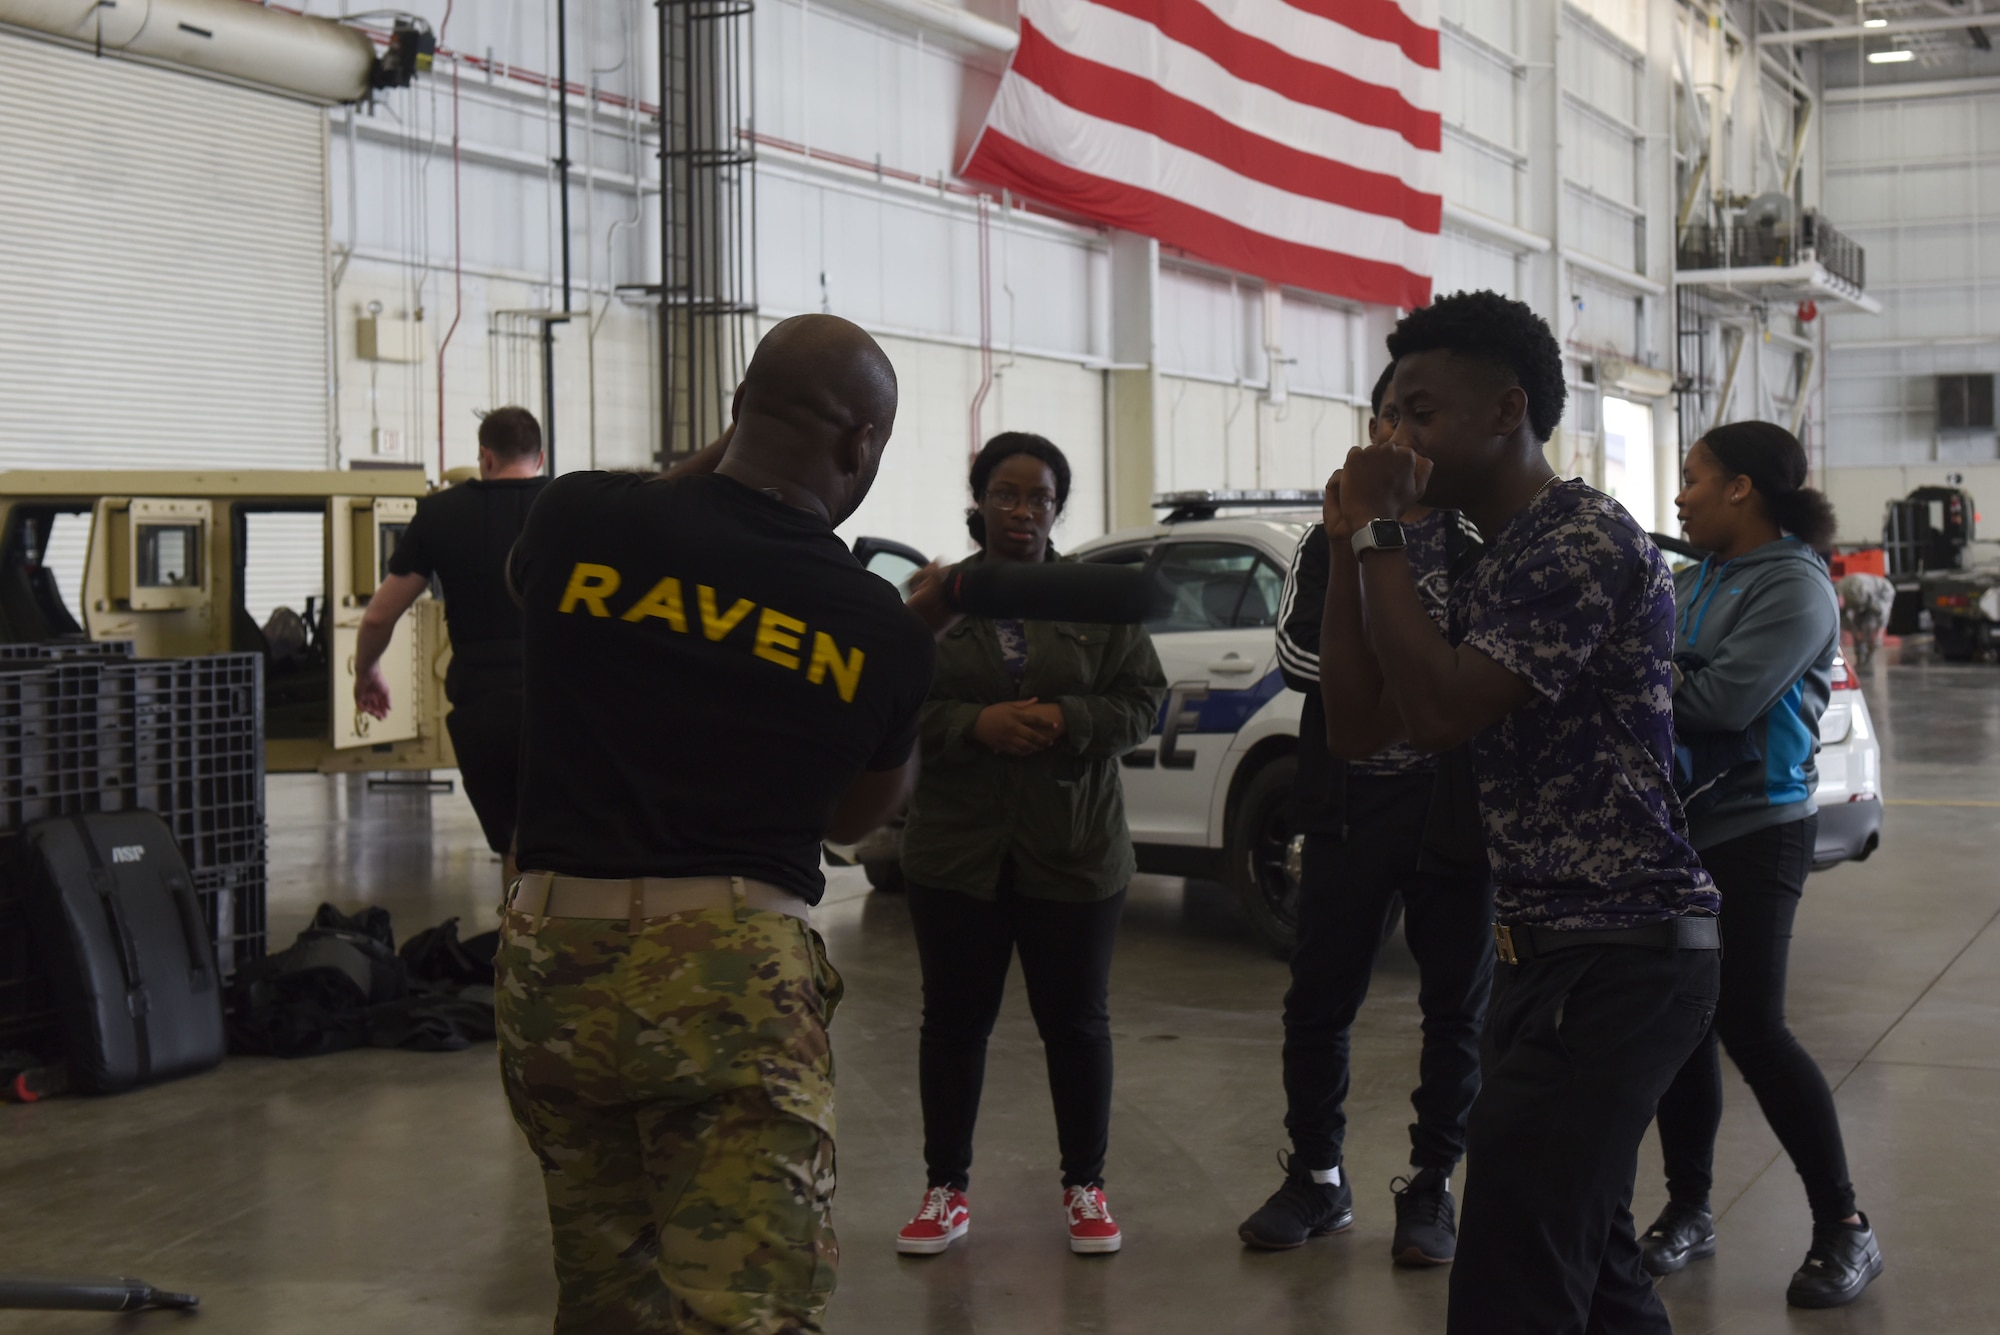 A man wearing a black shirt saying "RAVEN" on his back says stands next to a high school student with his fists up in a sparring position.